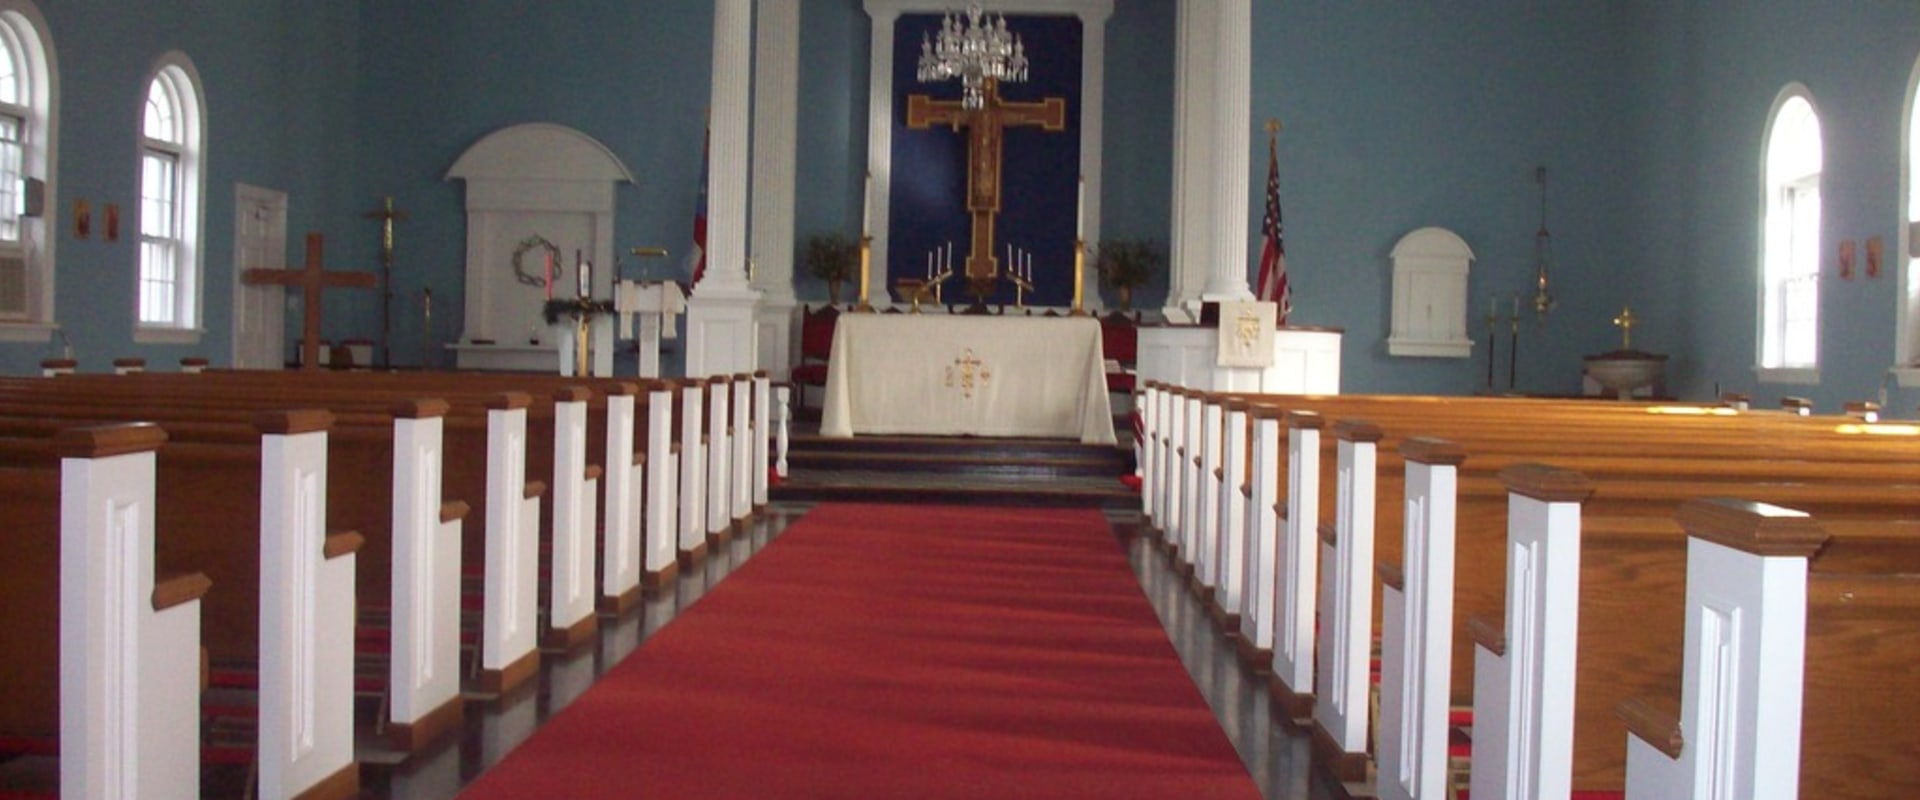 The Impact of Churches in Nassau County, NY